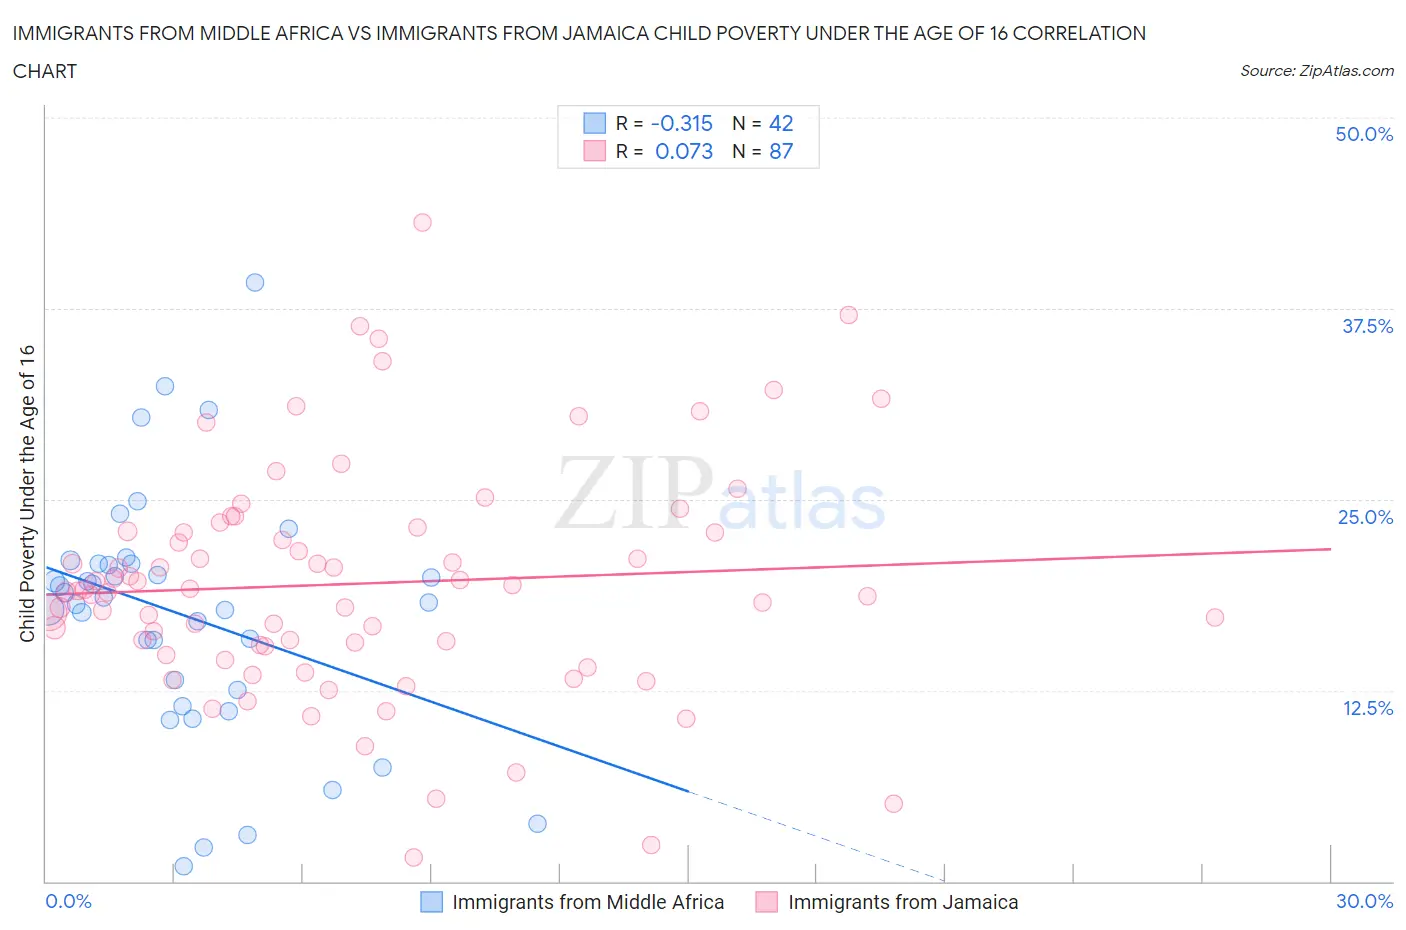 Immigrants from Middle Africa vs Immigrants from Jamaica Child Poverty Under the Age of 16